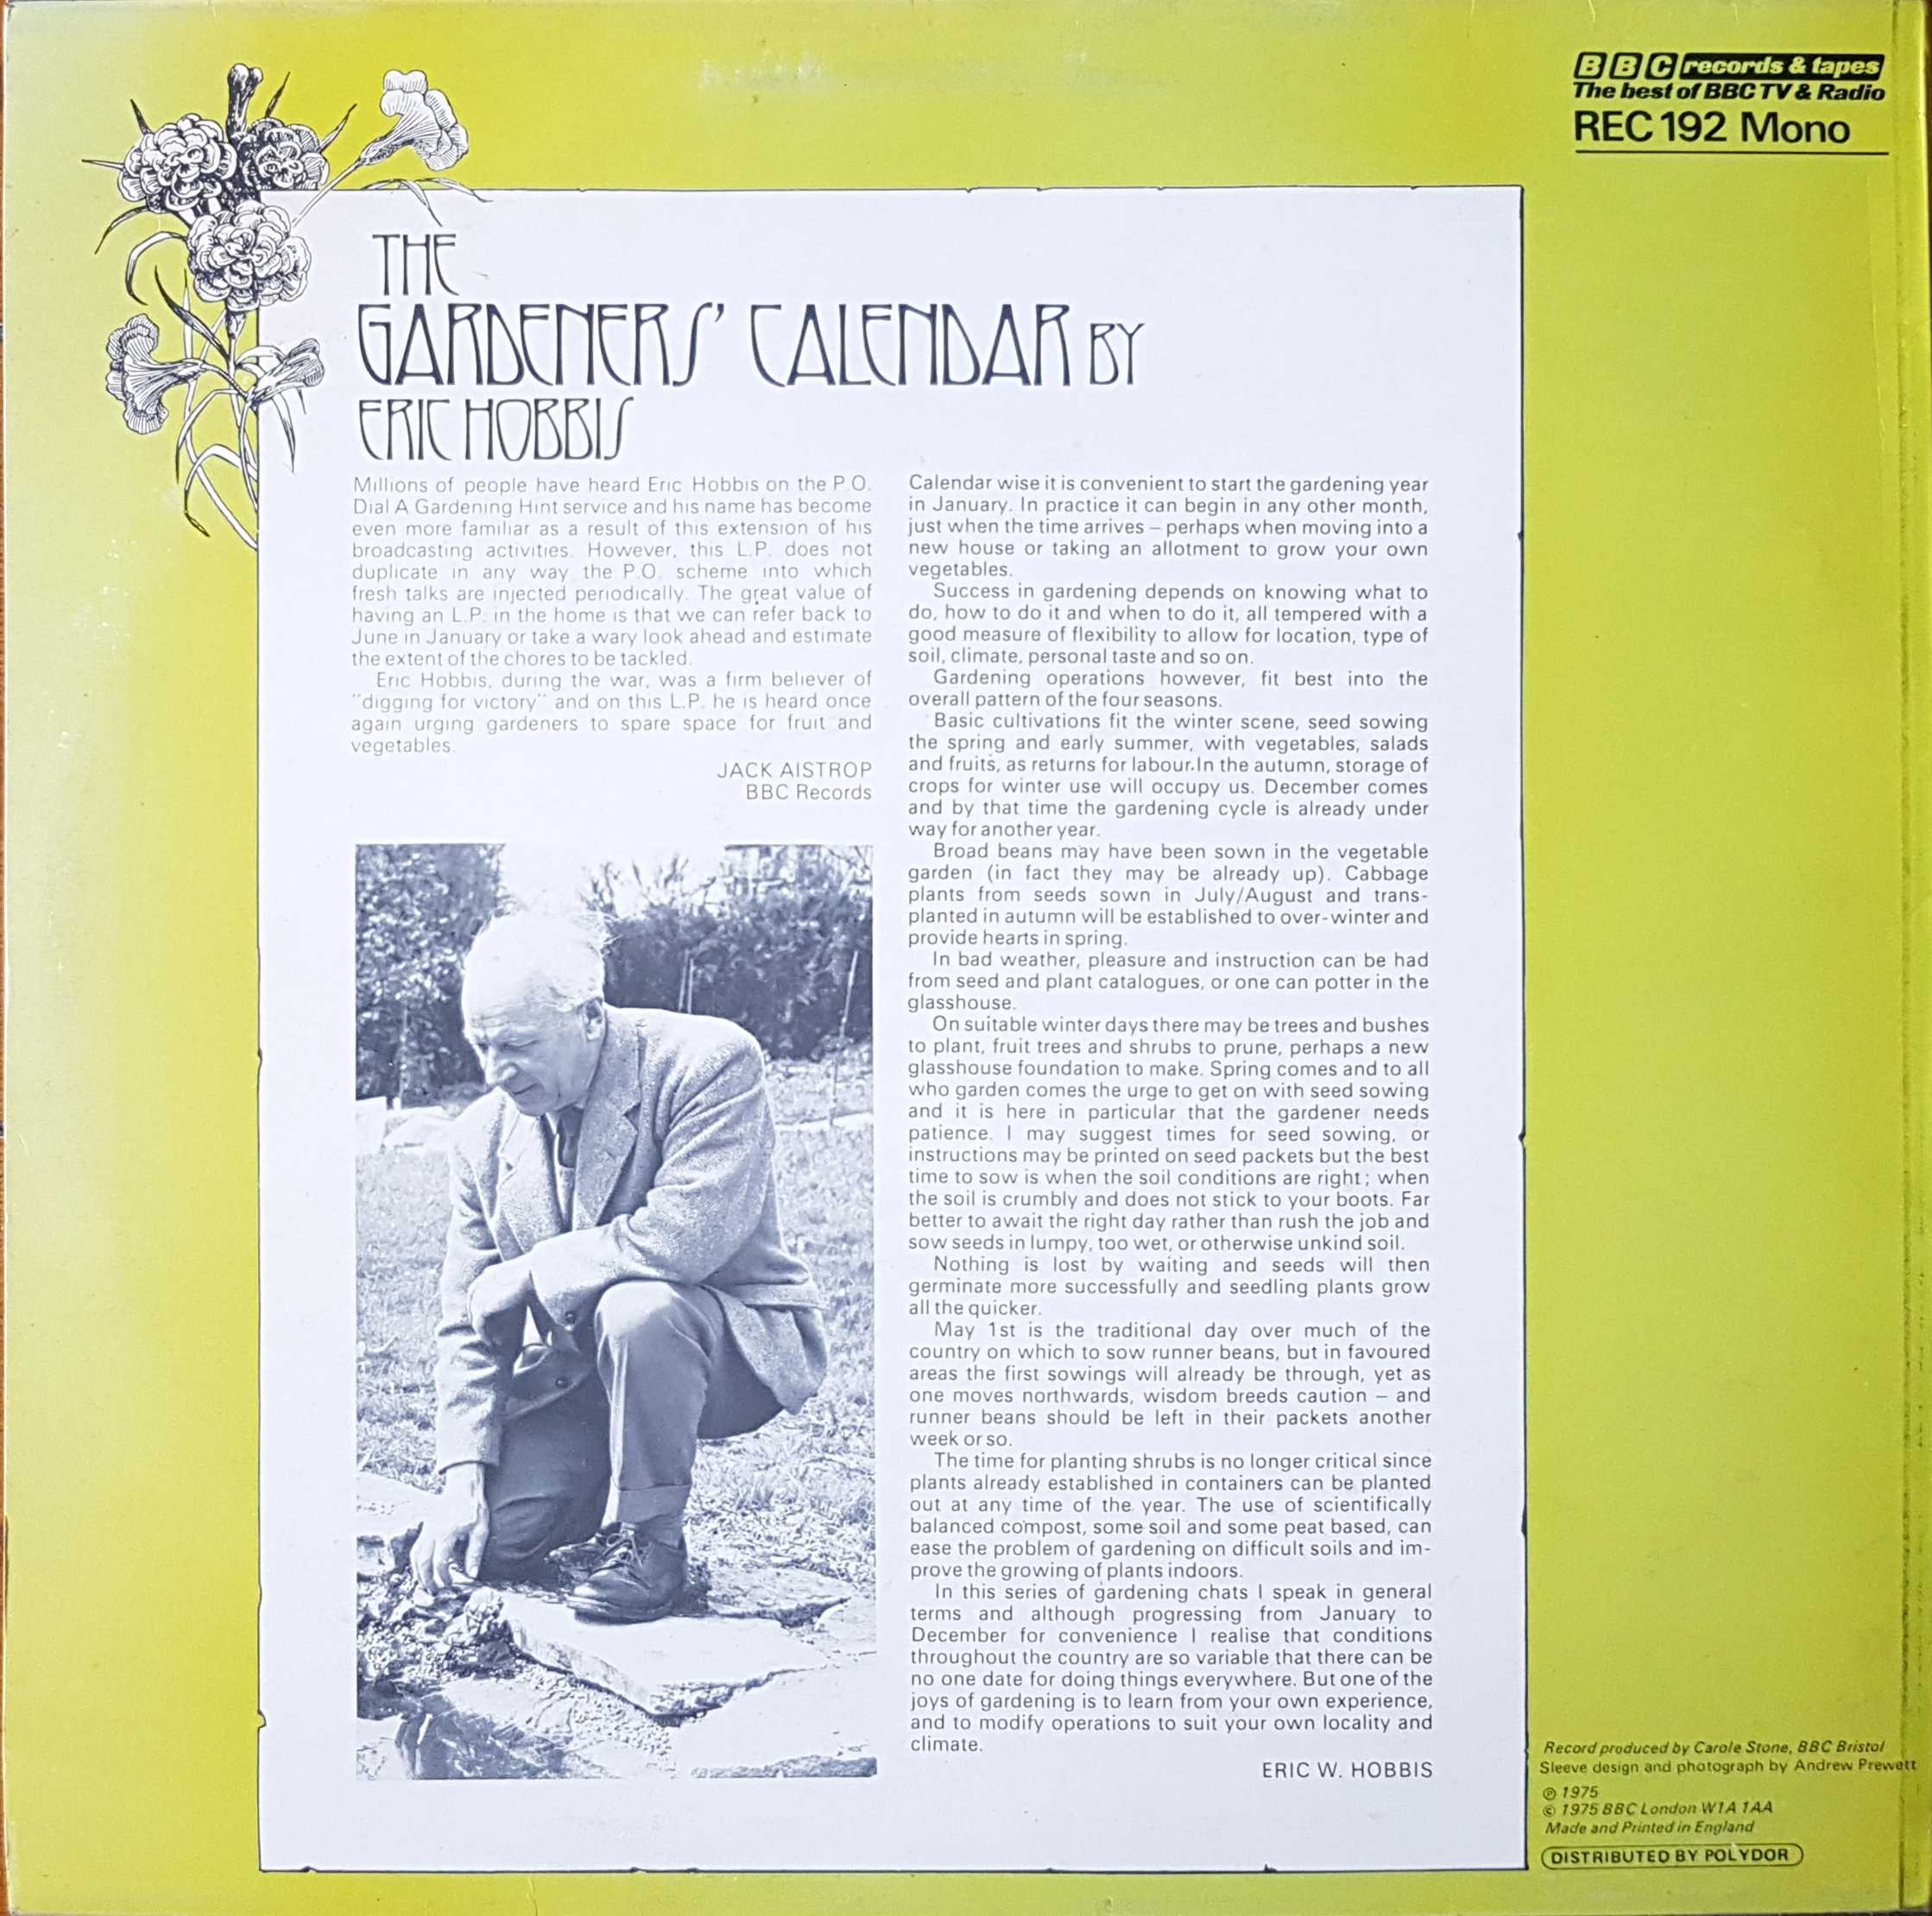 Picture of REC 192 The gardeners' calendar by artist Eric Hobbs from the BBC records and Tapes library